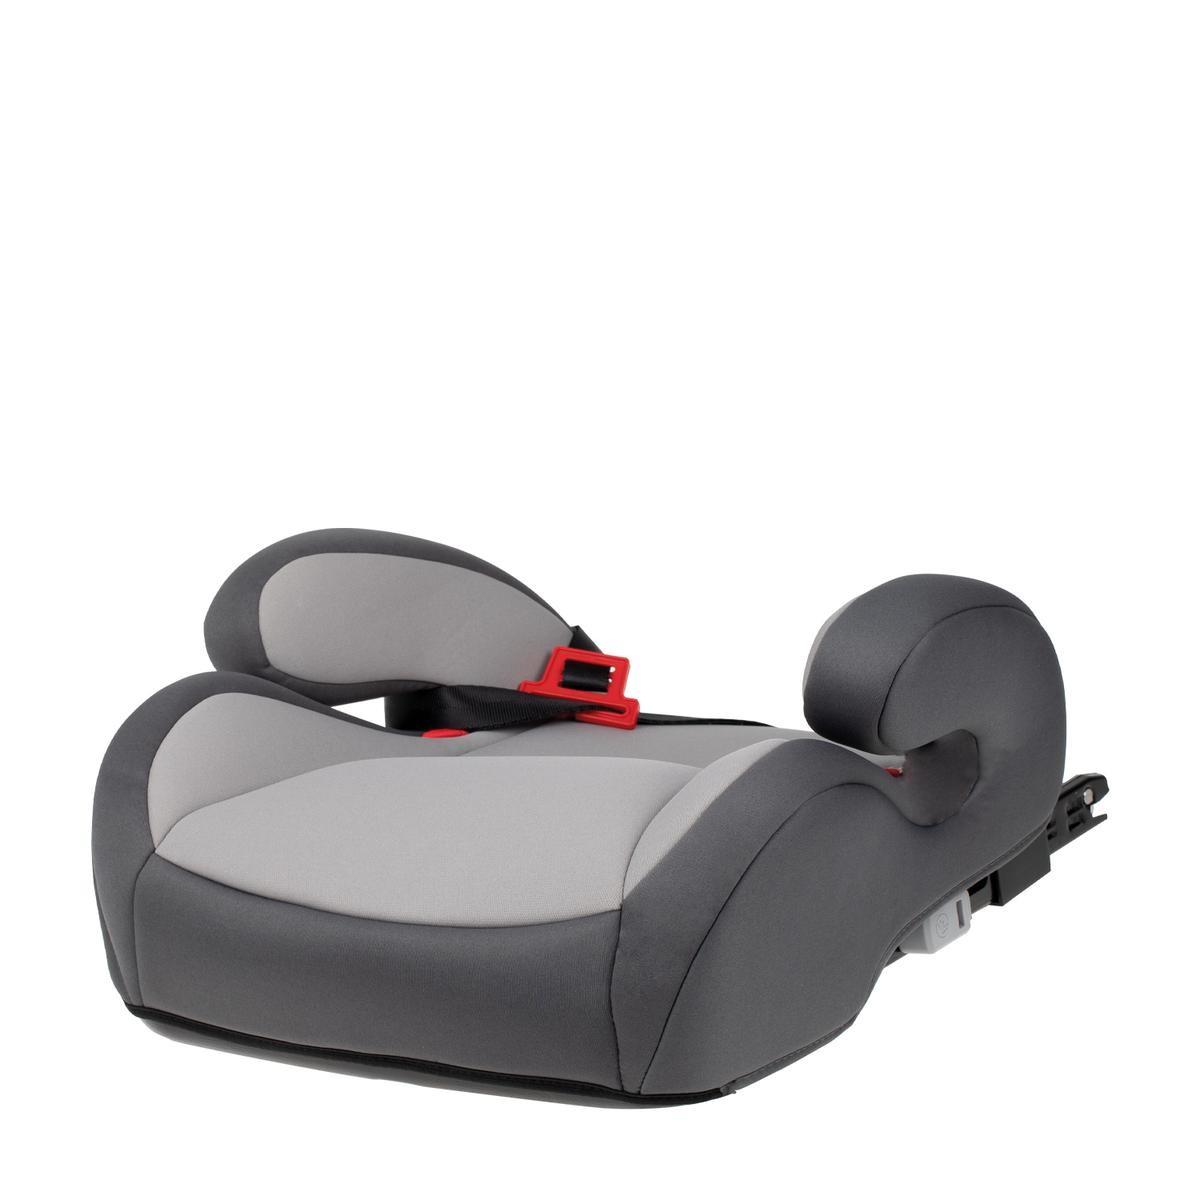 capsula JR4X with Isofix, 22-36kg, Group 3, grey Child weight: 22-36kg Booster car seat 774120 buy